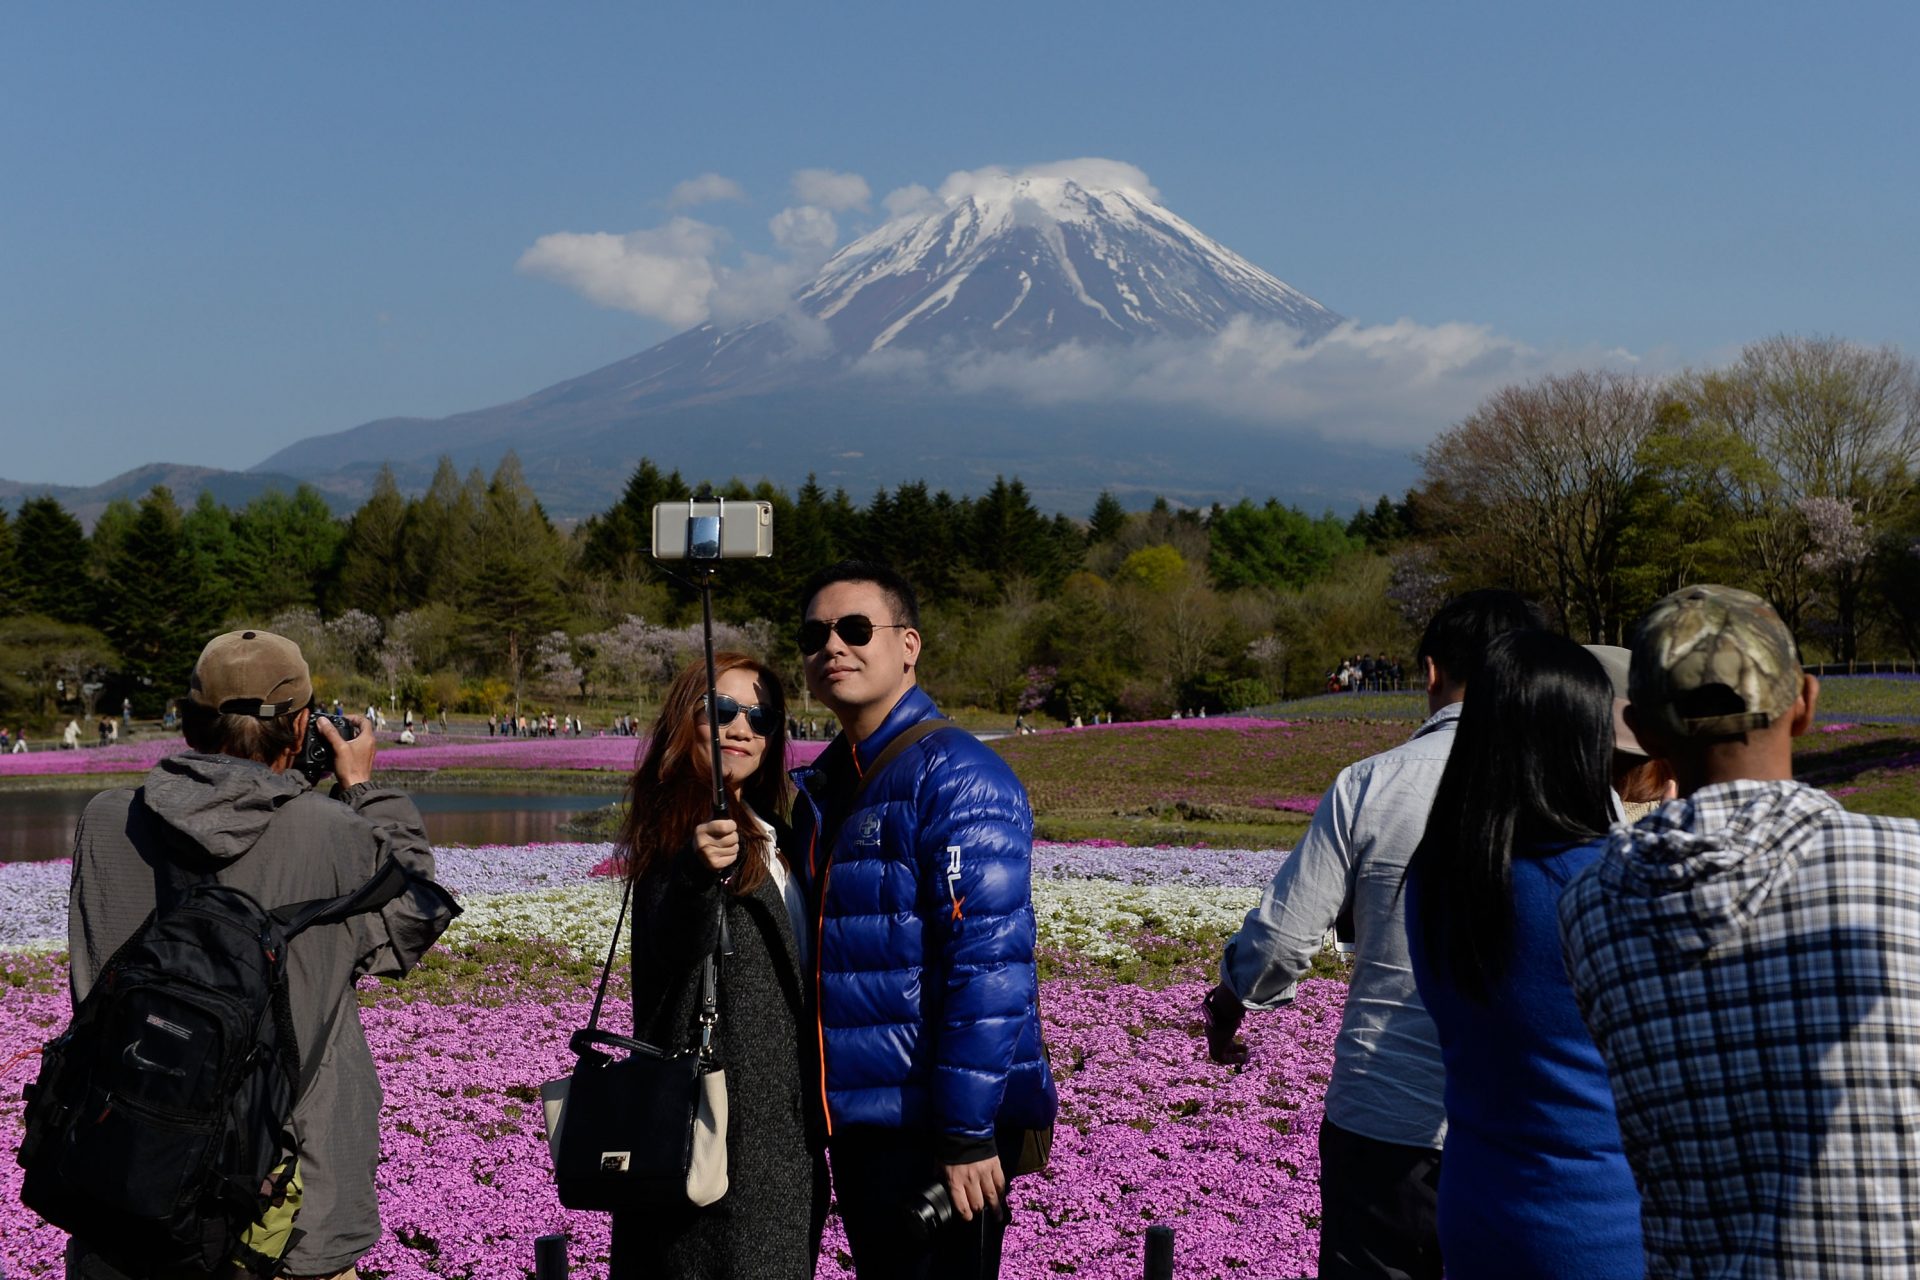 <p>A town in Japan has been making headlines because the residents want to build a wall to cover the view of Mount Fuji. Why would anyone want to block out a fabulous view?</p>